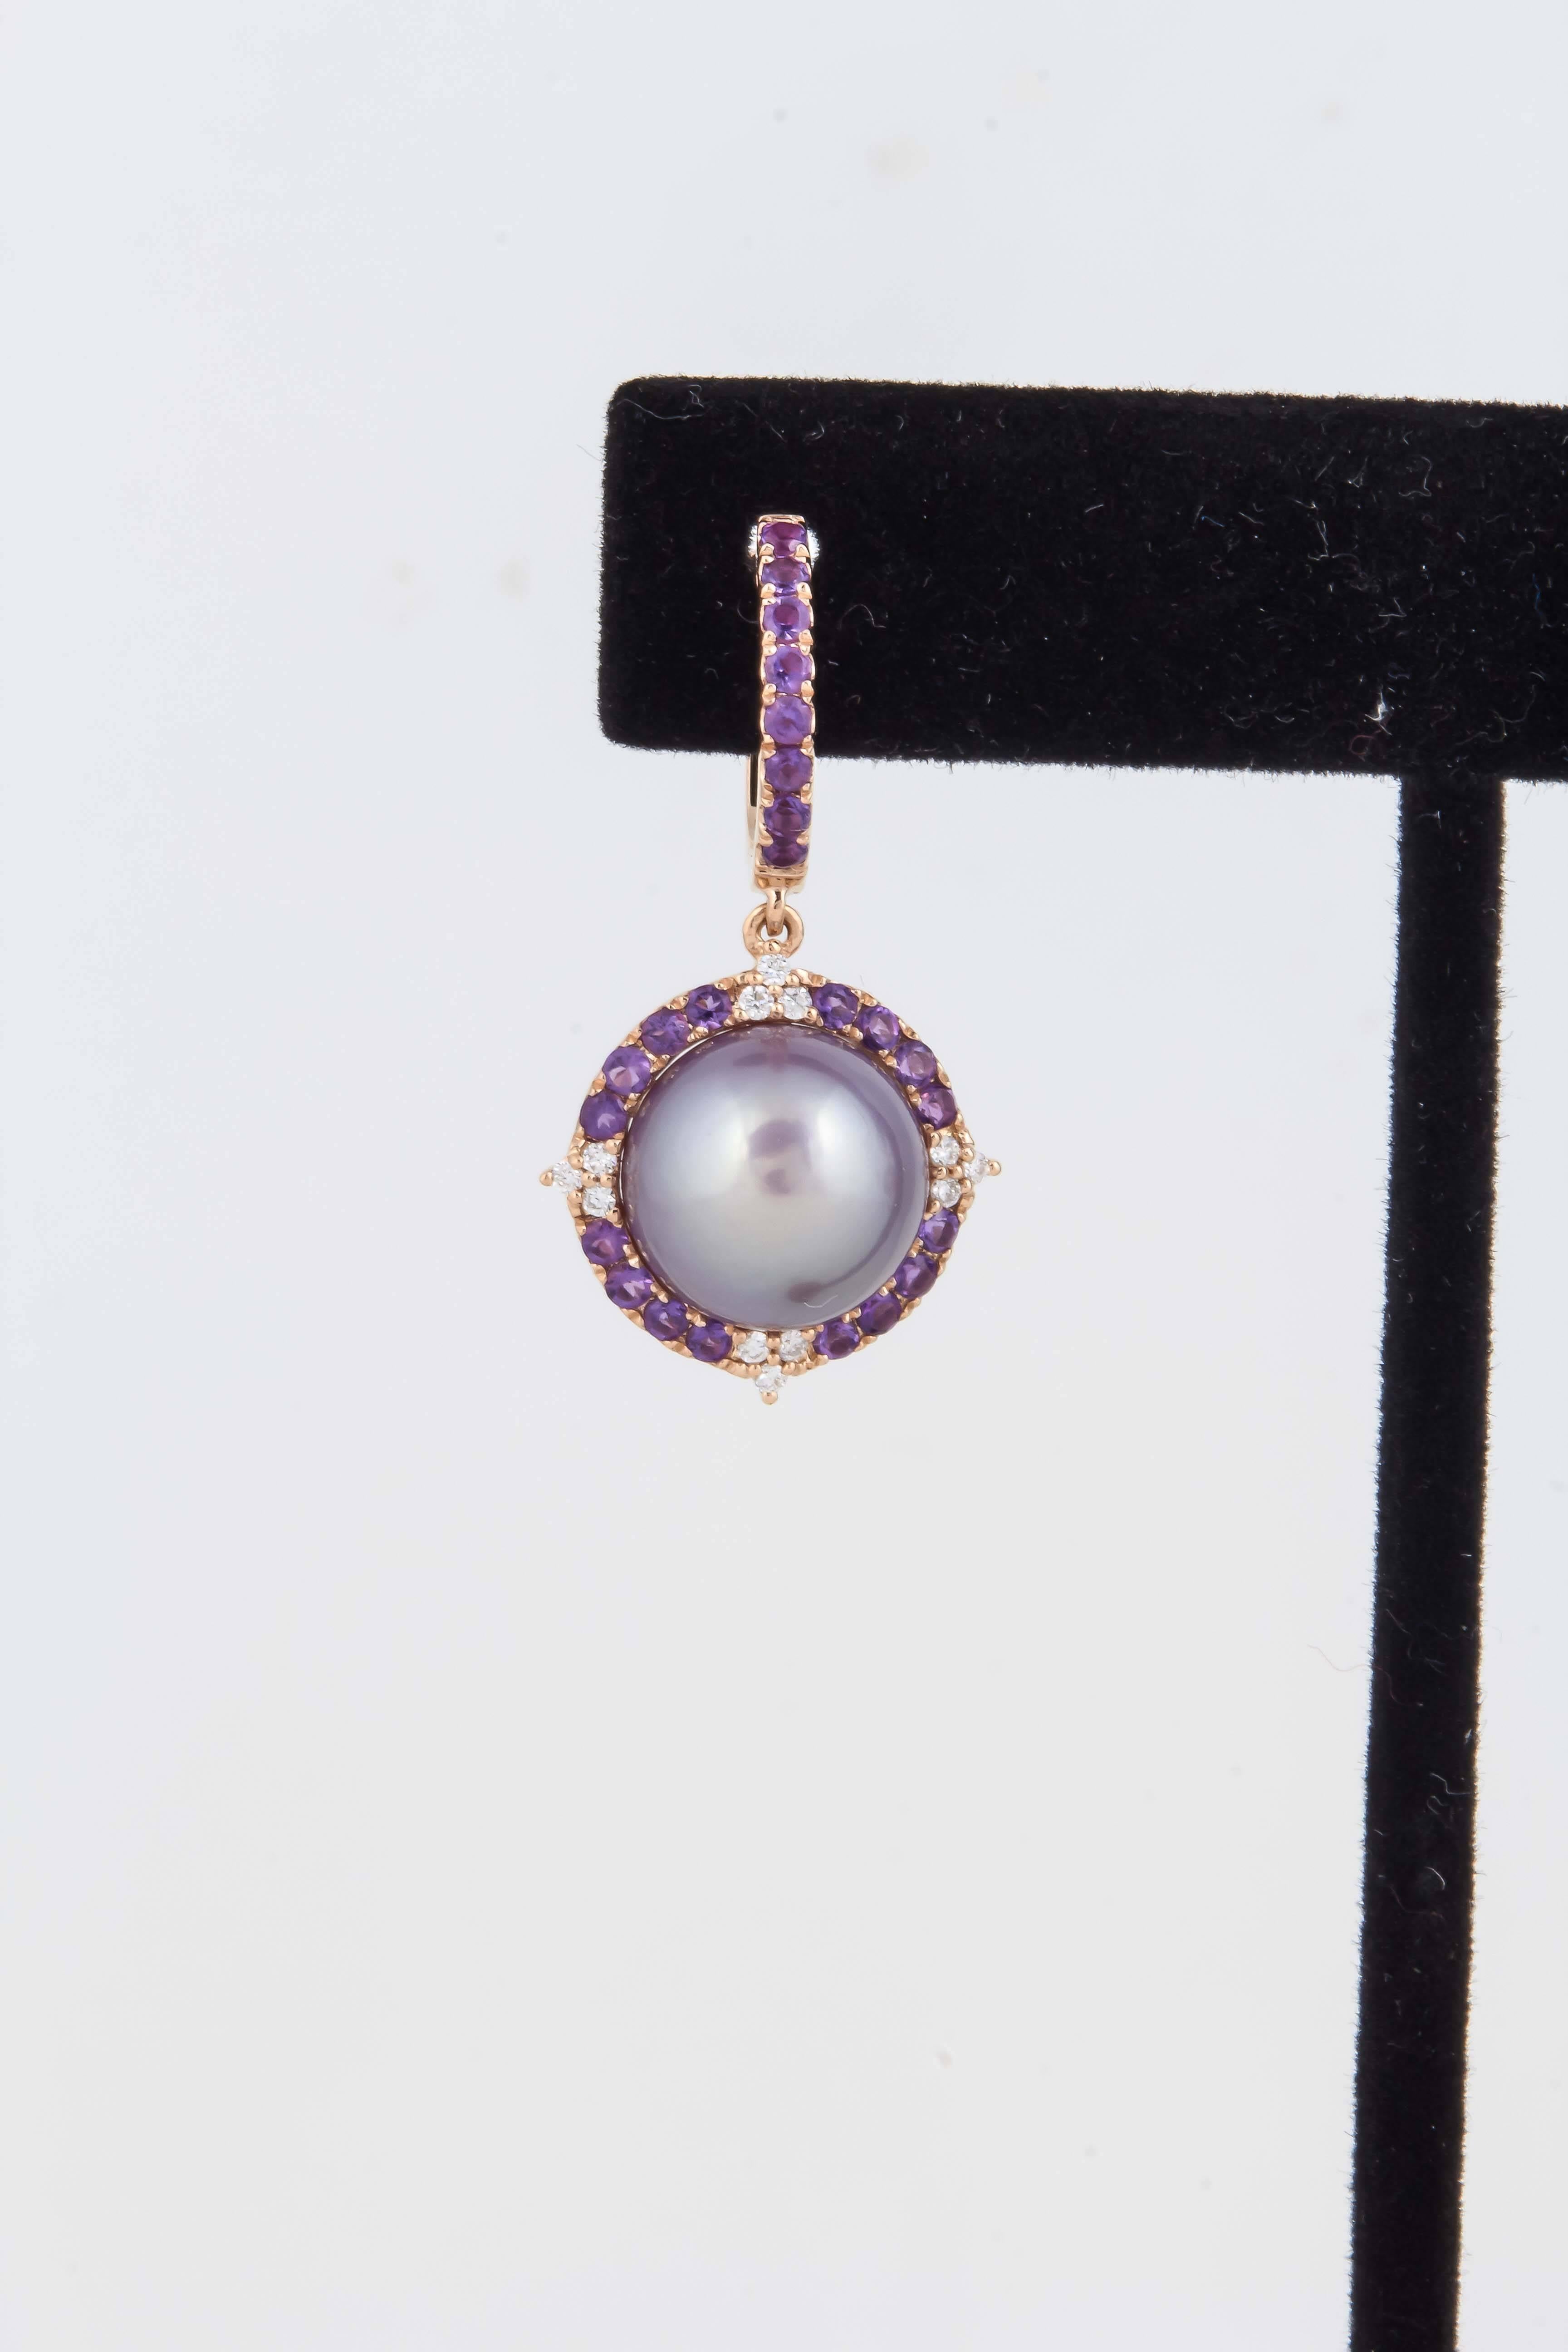 18K rose gold
Freshwater pink pearl 11-12 mm
Diamonds: 0.24 Cts.
Amethyst: 0.96 Cts.
4.7 g.